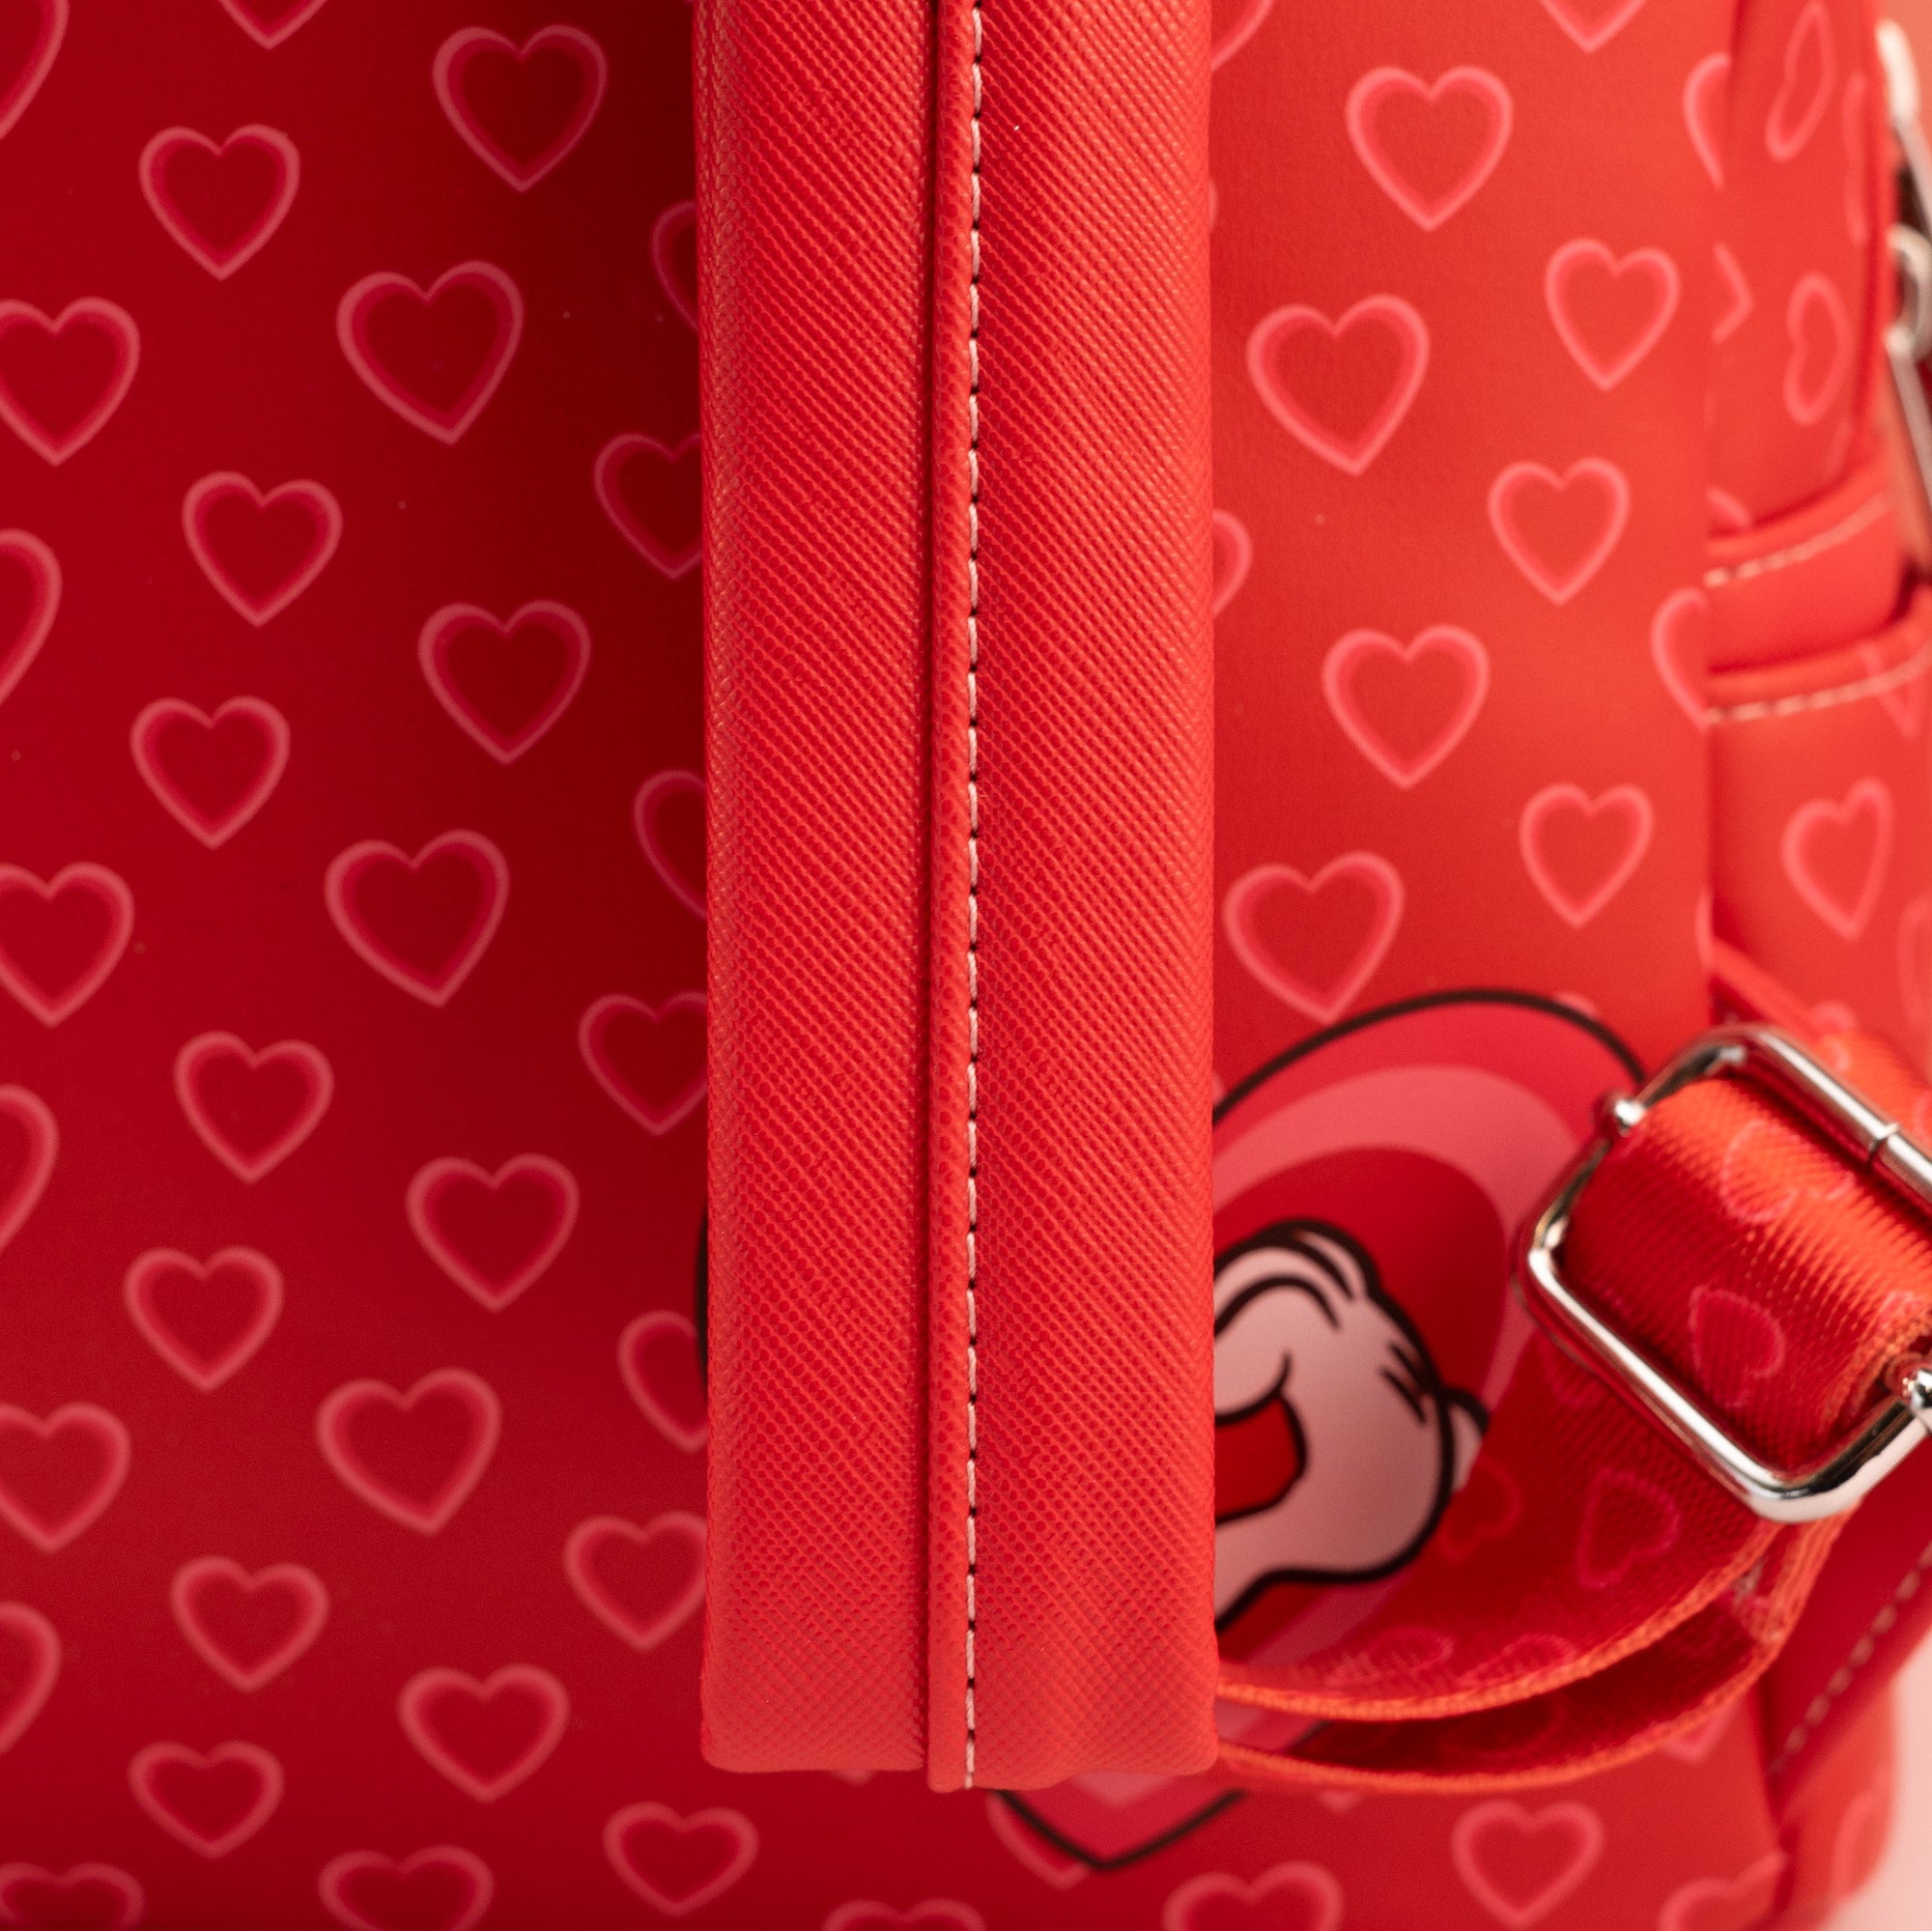 Loungefly x Disney Mickey and Minnie Valentines Day Mini Backpack